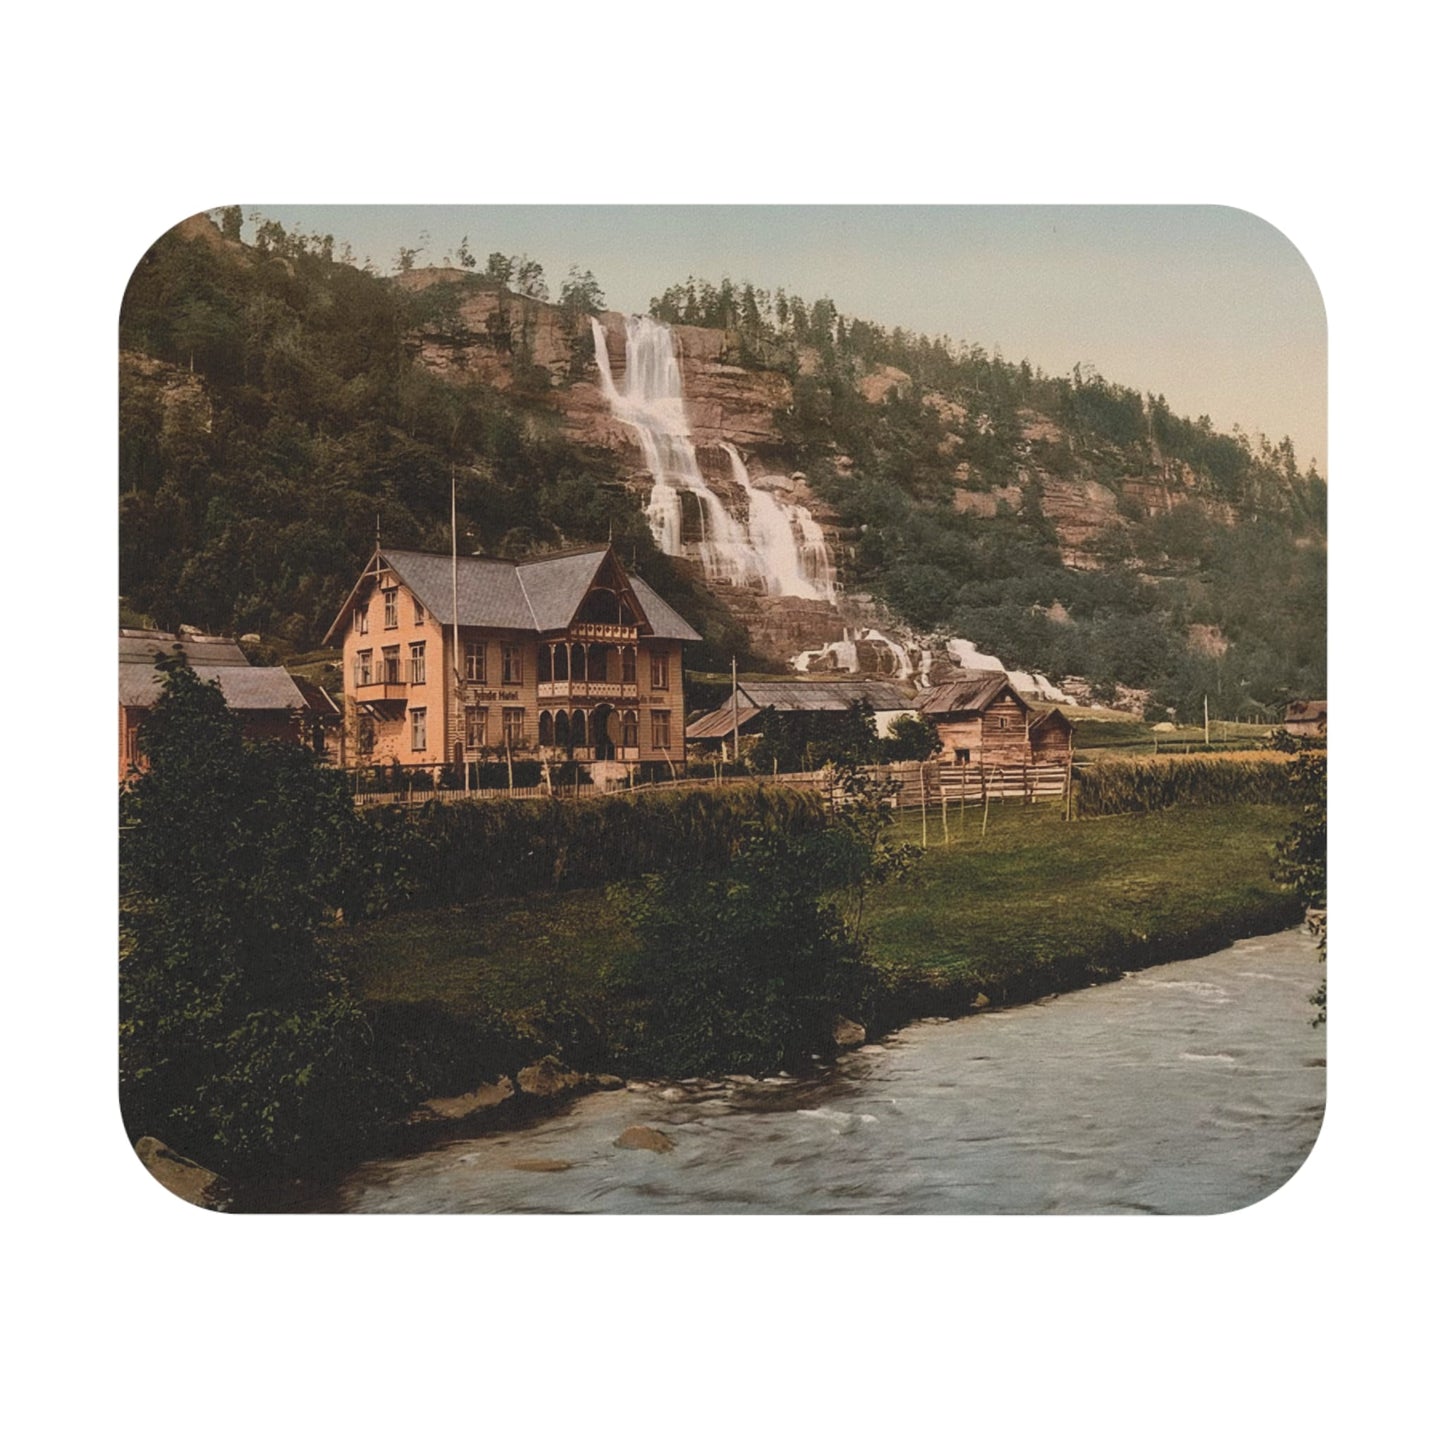 Vintage Mountain River Mouse Pad showcasing Norway scenic view, ideal for desk and office decor.